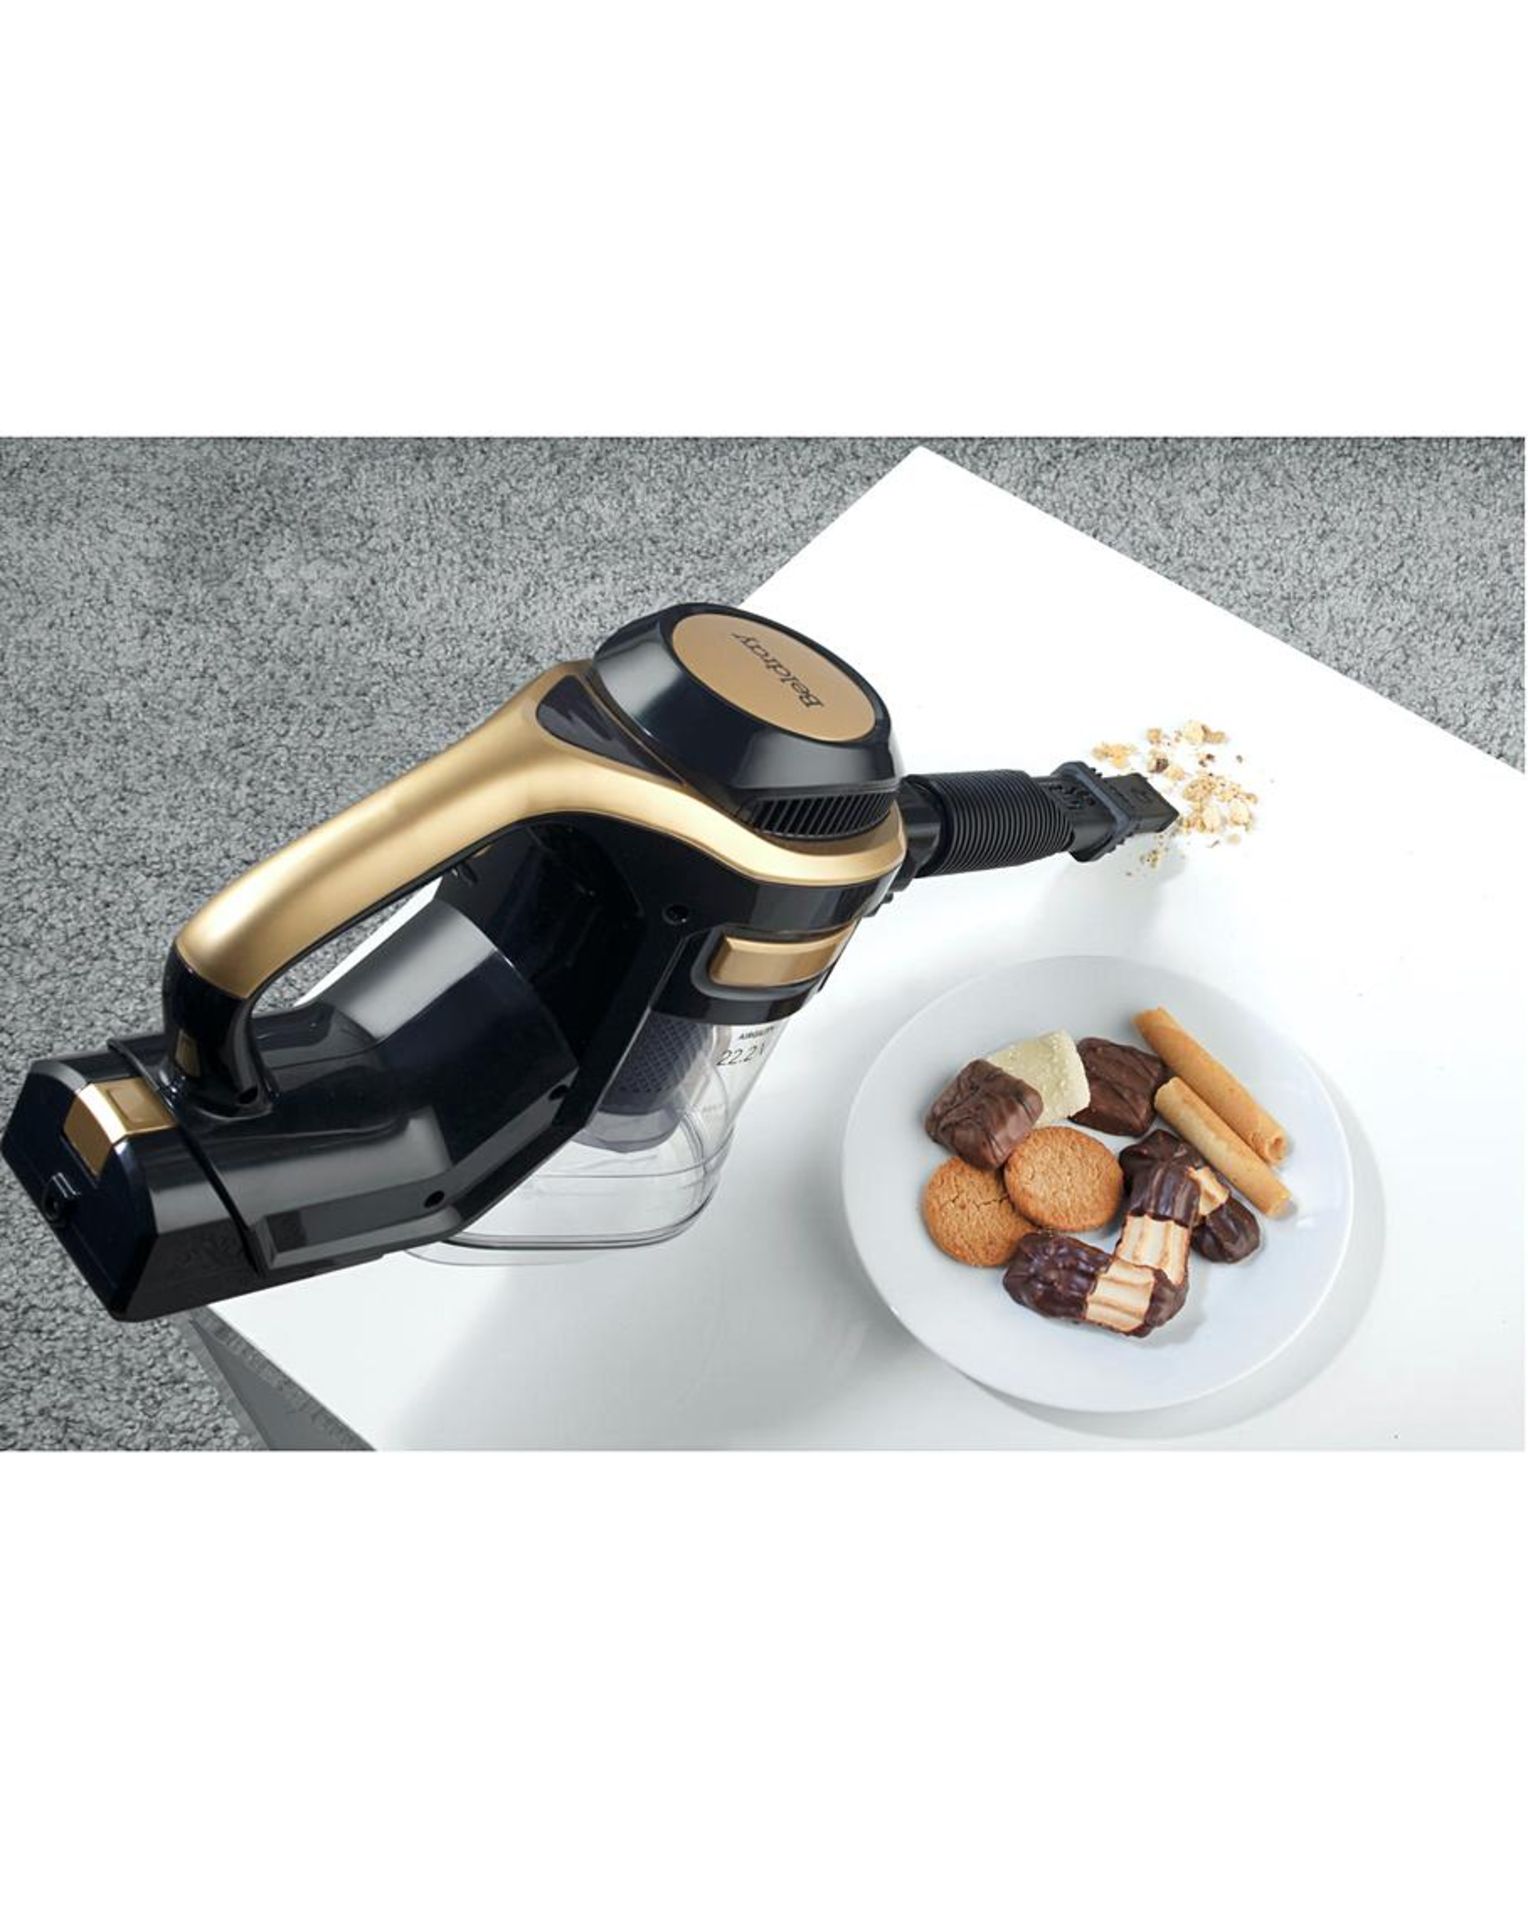 Beldray 2 in 1 Airgility Motorhead Cordless Vacuum Cleaner. - SR6. Ideal for ceiling to floor - Image 2 of 2